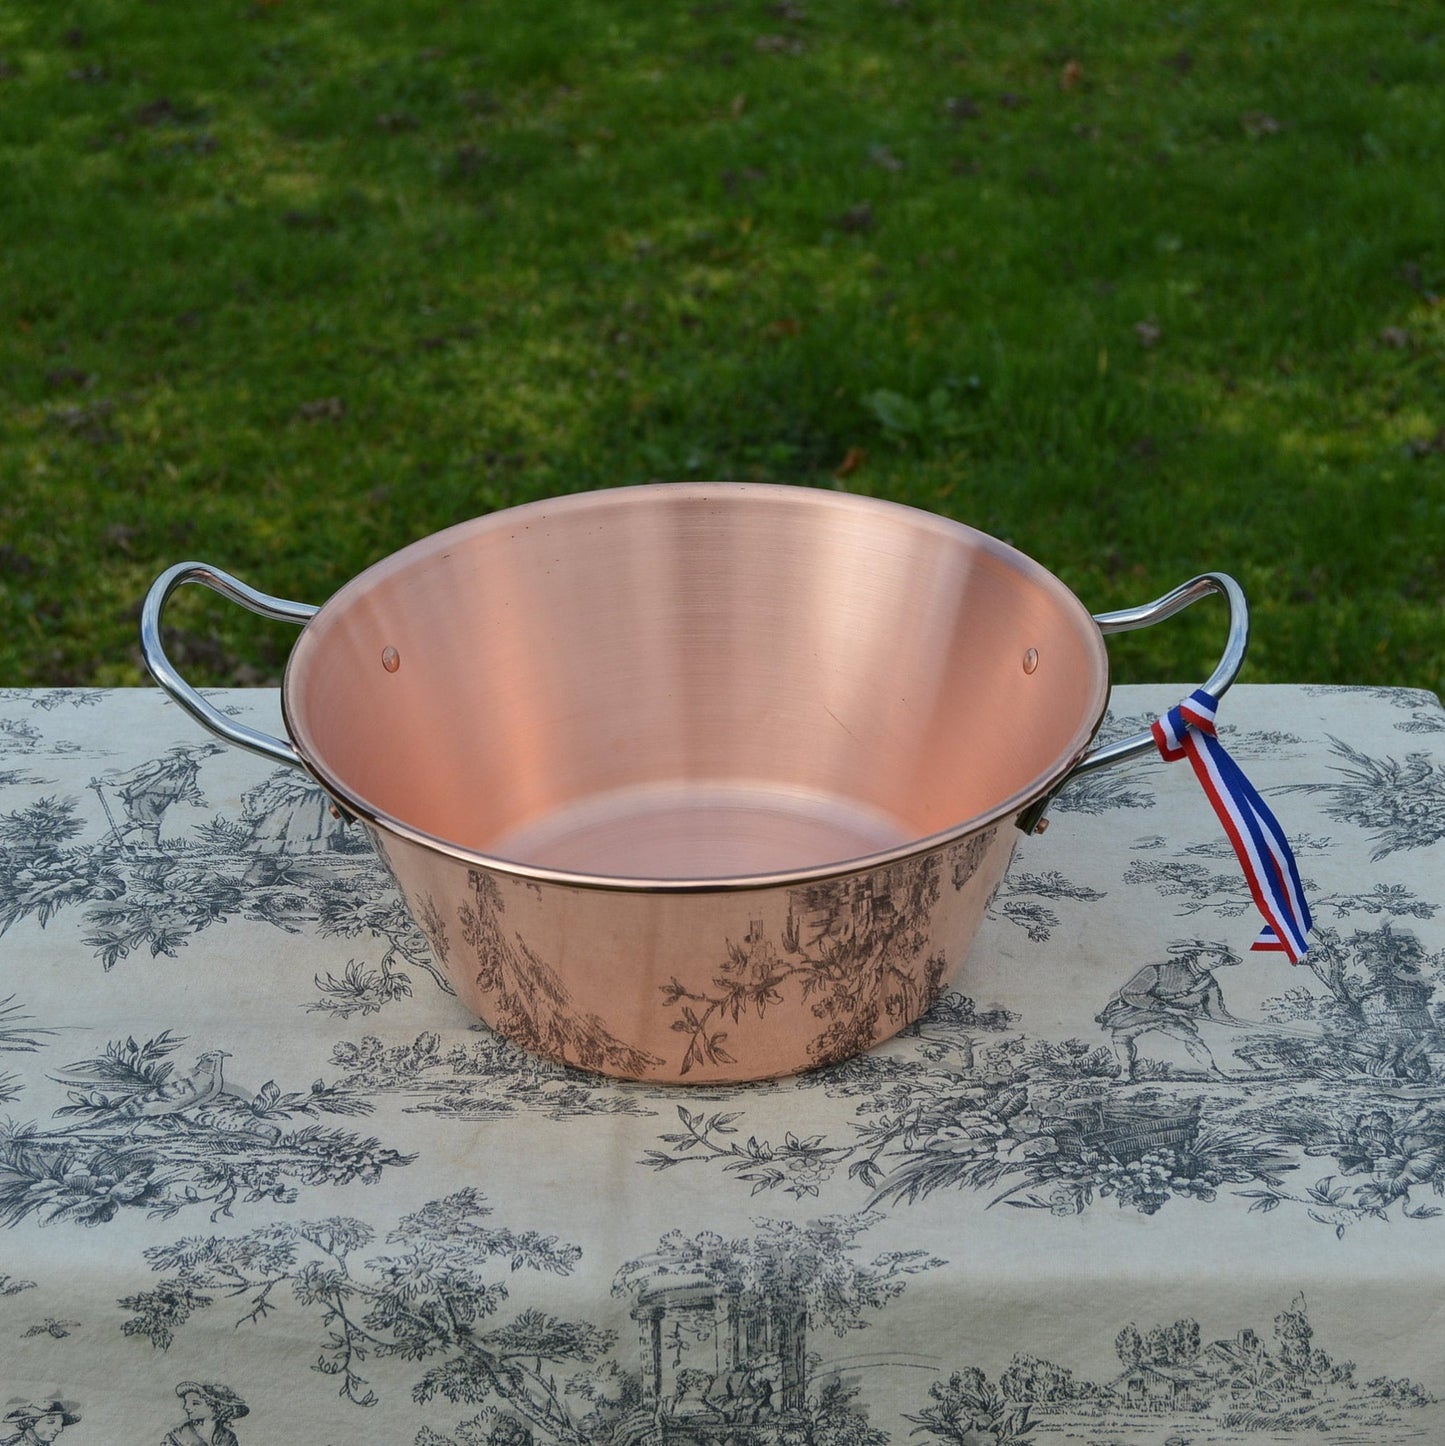 New NKC 28 cm Copper Jam Pan Normandy Kitchen Copper Jam Jelly Pan 28cm 11" Rolled Top Stainless Steel Handles New Normandy Kitchen